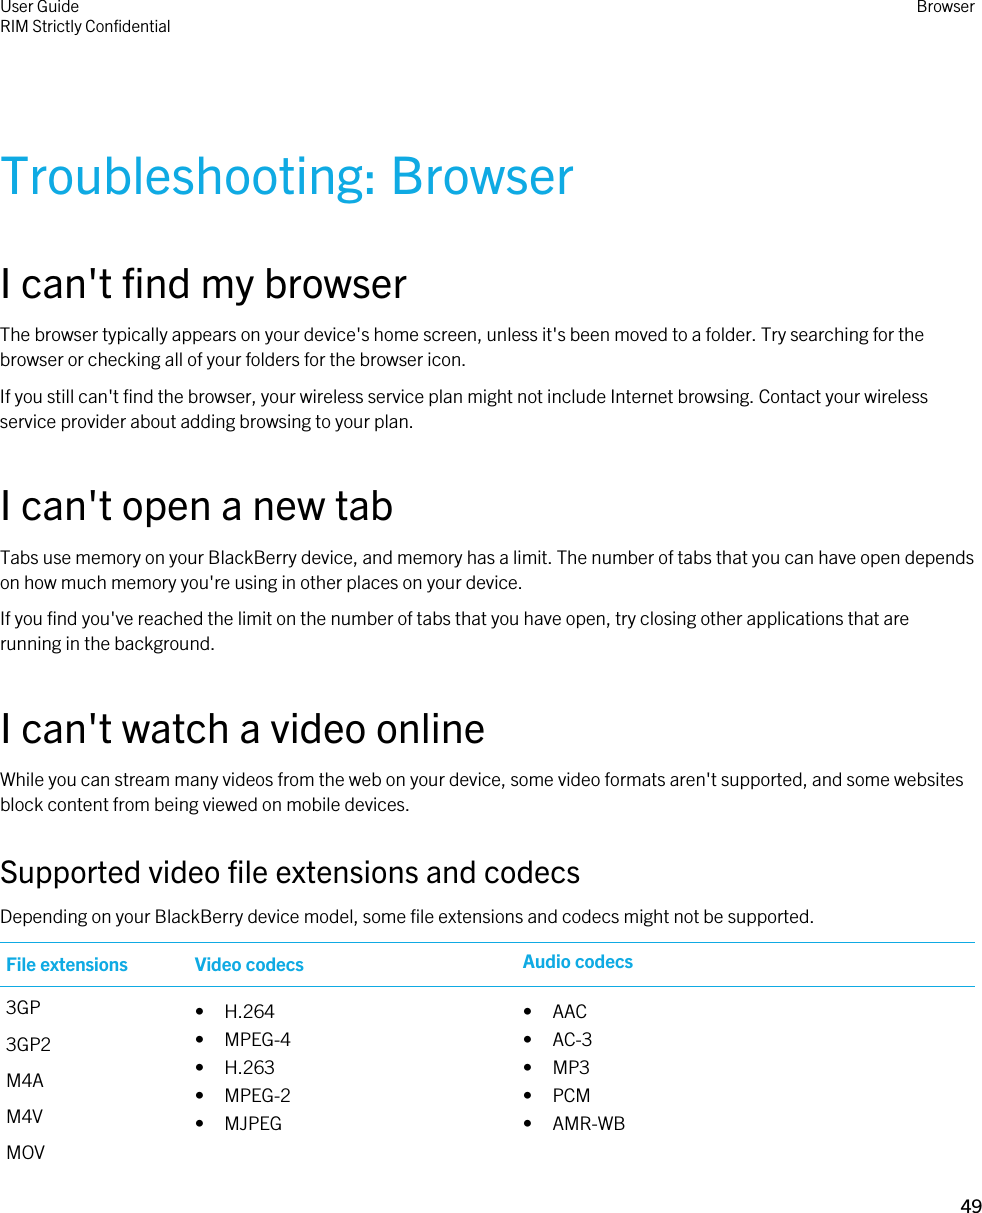 Troubleshooting: BrowserI can&apos;t find my browserThe browser typically appears on your device&apos;s home screen, unless it&apos;s been moved to a folder. Try searching for the browser or checking all of your folders for the browser icon.If you still can&apos;t find the browser, your wireless service plan might not include Internet browsing. Contact your wireless service provider about adding browsing to your plan.I can&apos;t open a new tabTabs use memory on your BlackBerry device, and memory has a limit. The number of tabs that you can have open depends on how much memory you&apos;re using in other places on your device.If you find you&apos;ve reached the limit on the number of tabs that you have open, try closing other applications that are running in the background.I can&apos;t watch a video onlineWhile you can stream many videos from the web on your device, some video formats aren&apos;t supported, and some websites block content from being viewed on mobile devices.Supported video file extensions and codecsDepending on your BlackBerry device model, some file extensions and codecs might not be supported.File extensions Video codecs Audio codecs3GP3GP2M4AM4VMOV• H.264• MPEG-4• H.263• MPEG-2• MJPEG• AAC• AC-3• MP3• PCM• AMR-WBUser GuideRIM Strictly Confidential Browser49 